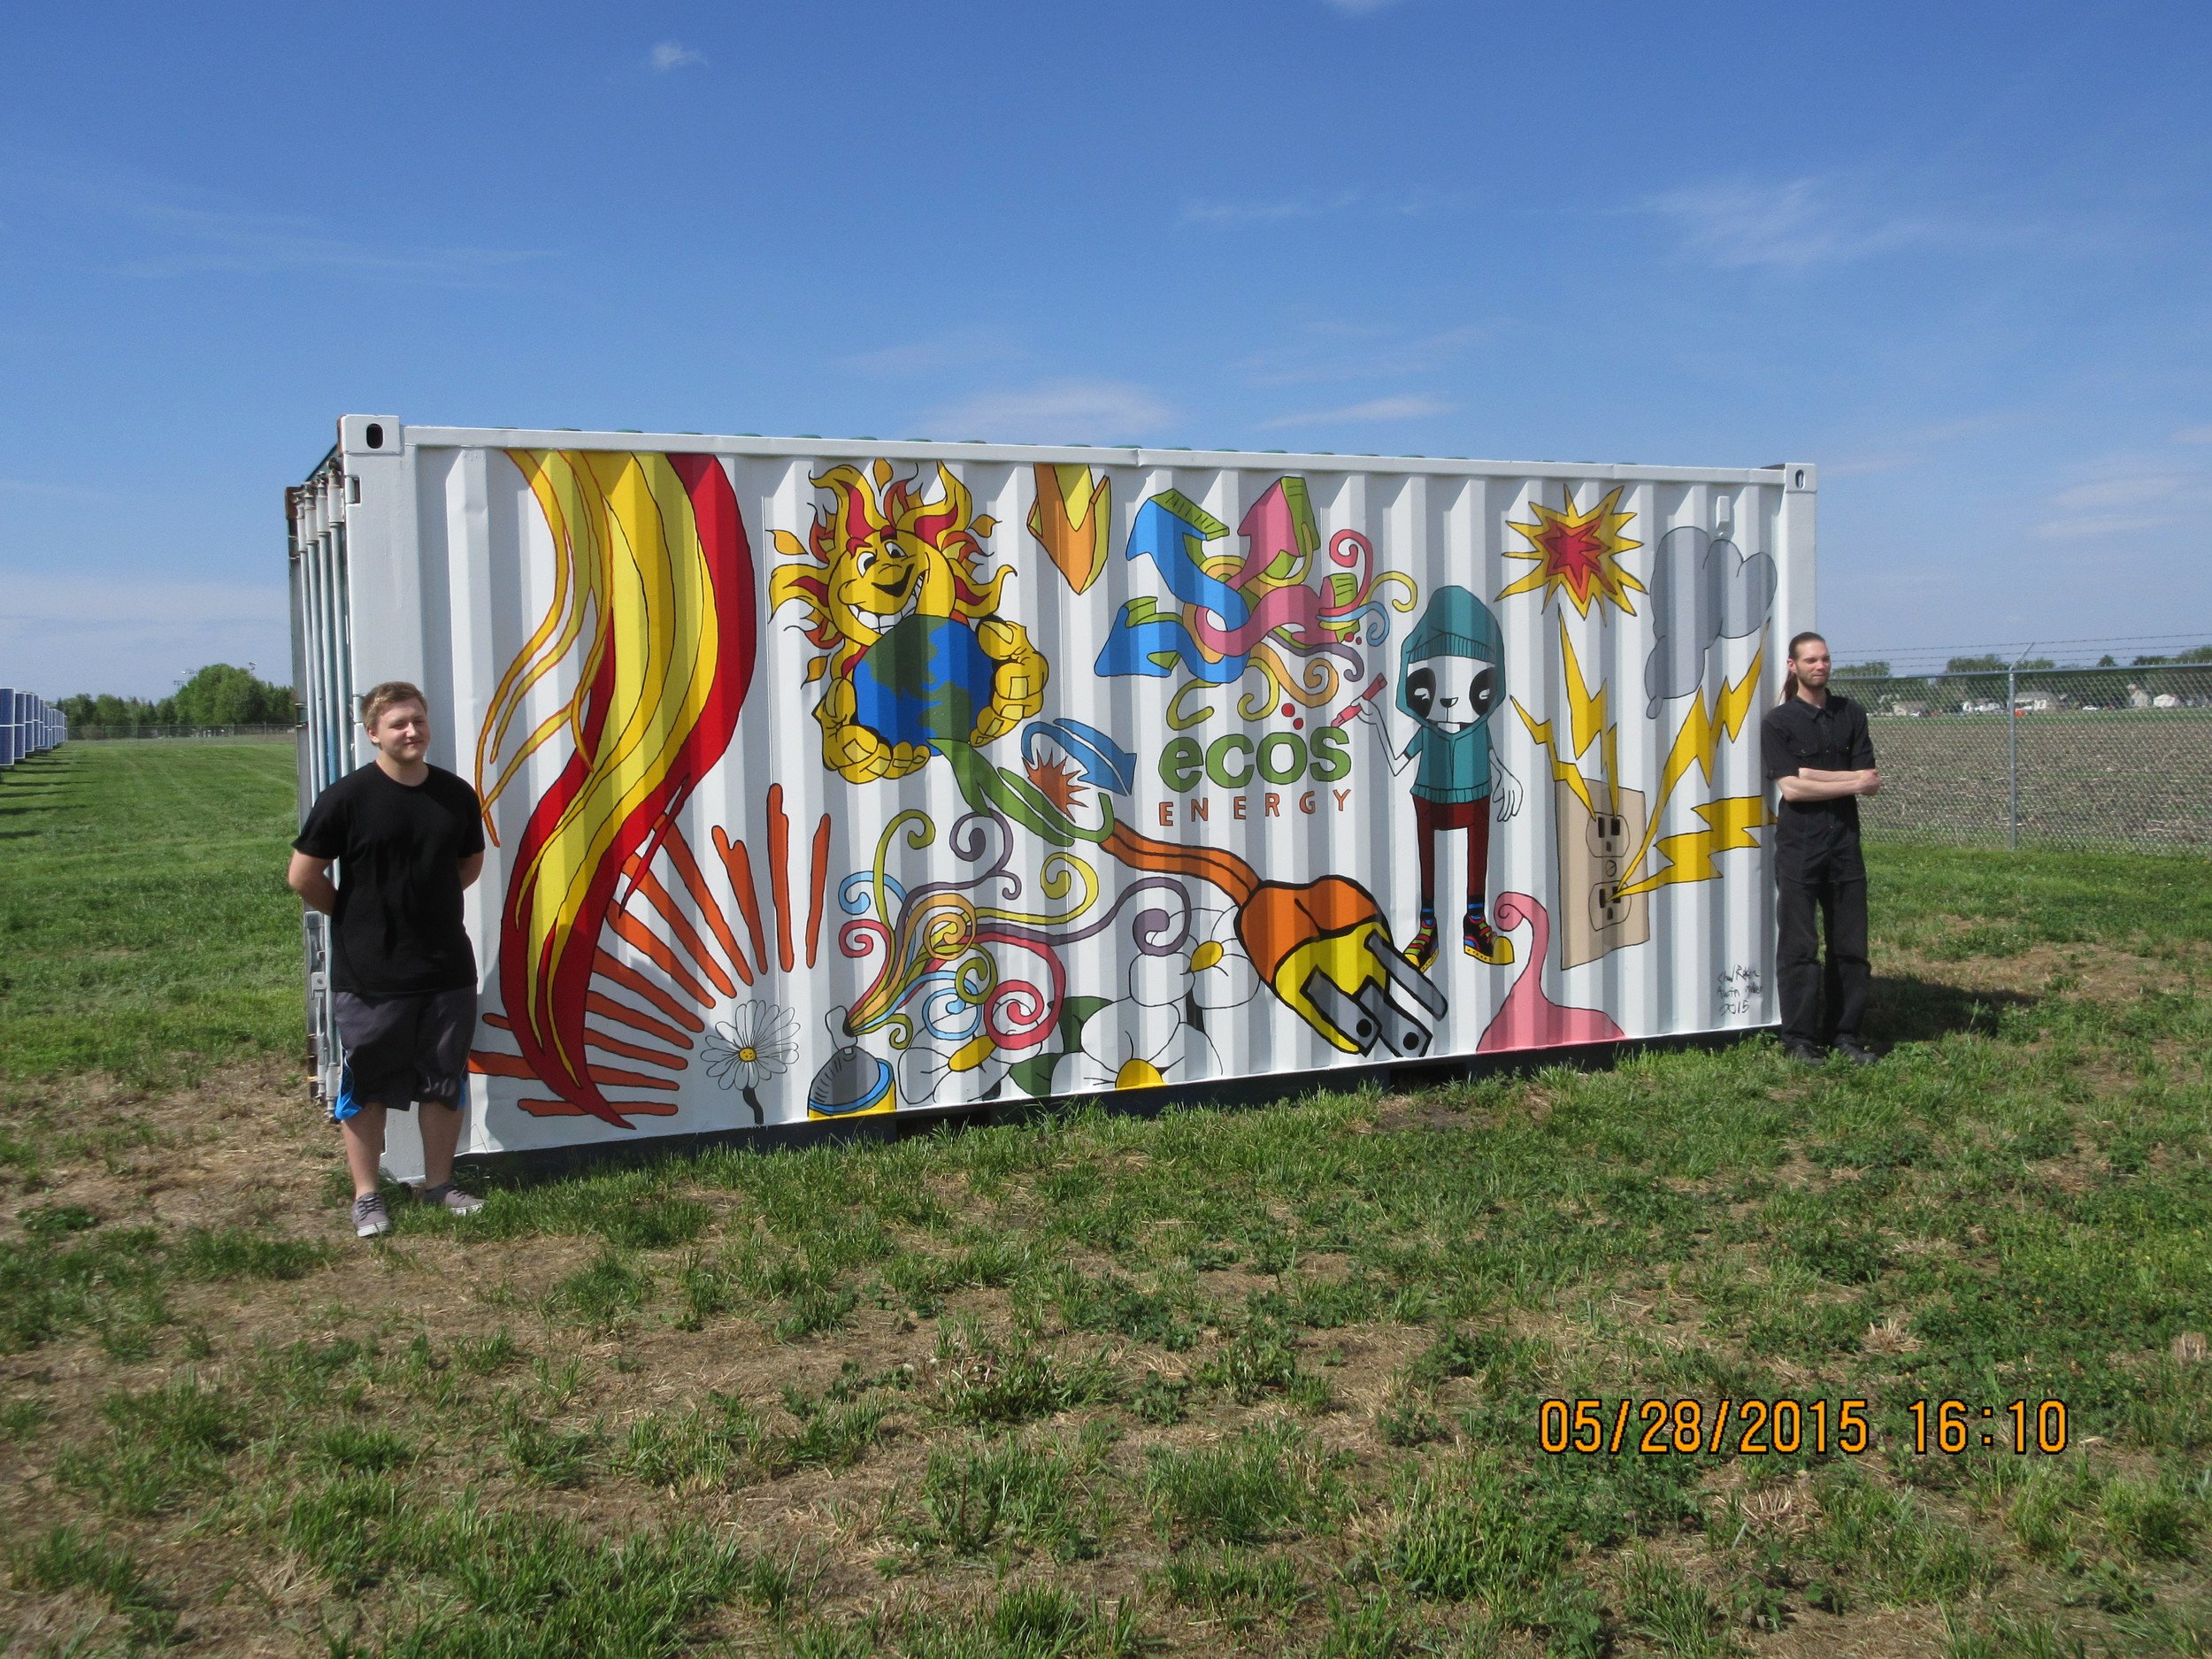 Chad Reker and Austin Miller in front of their container design